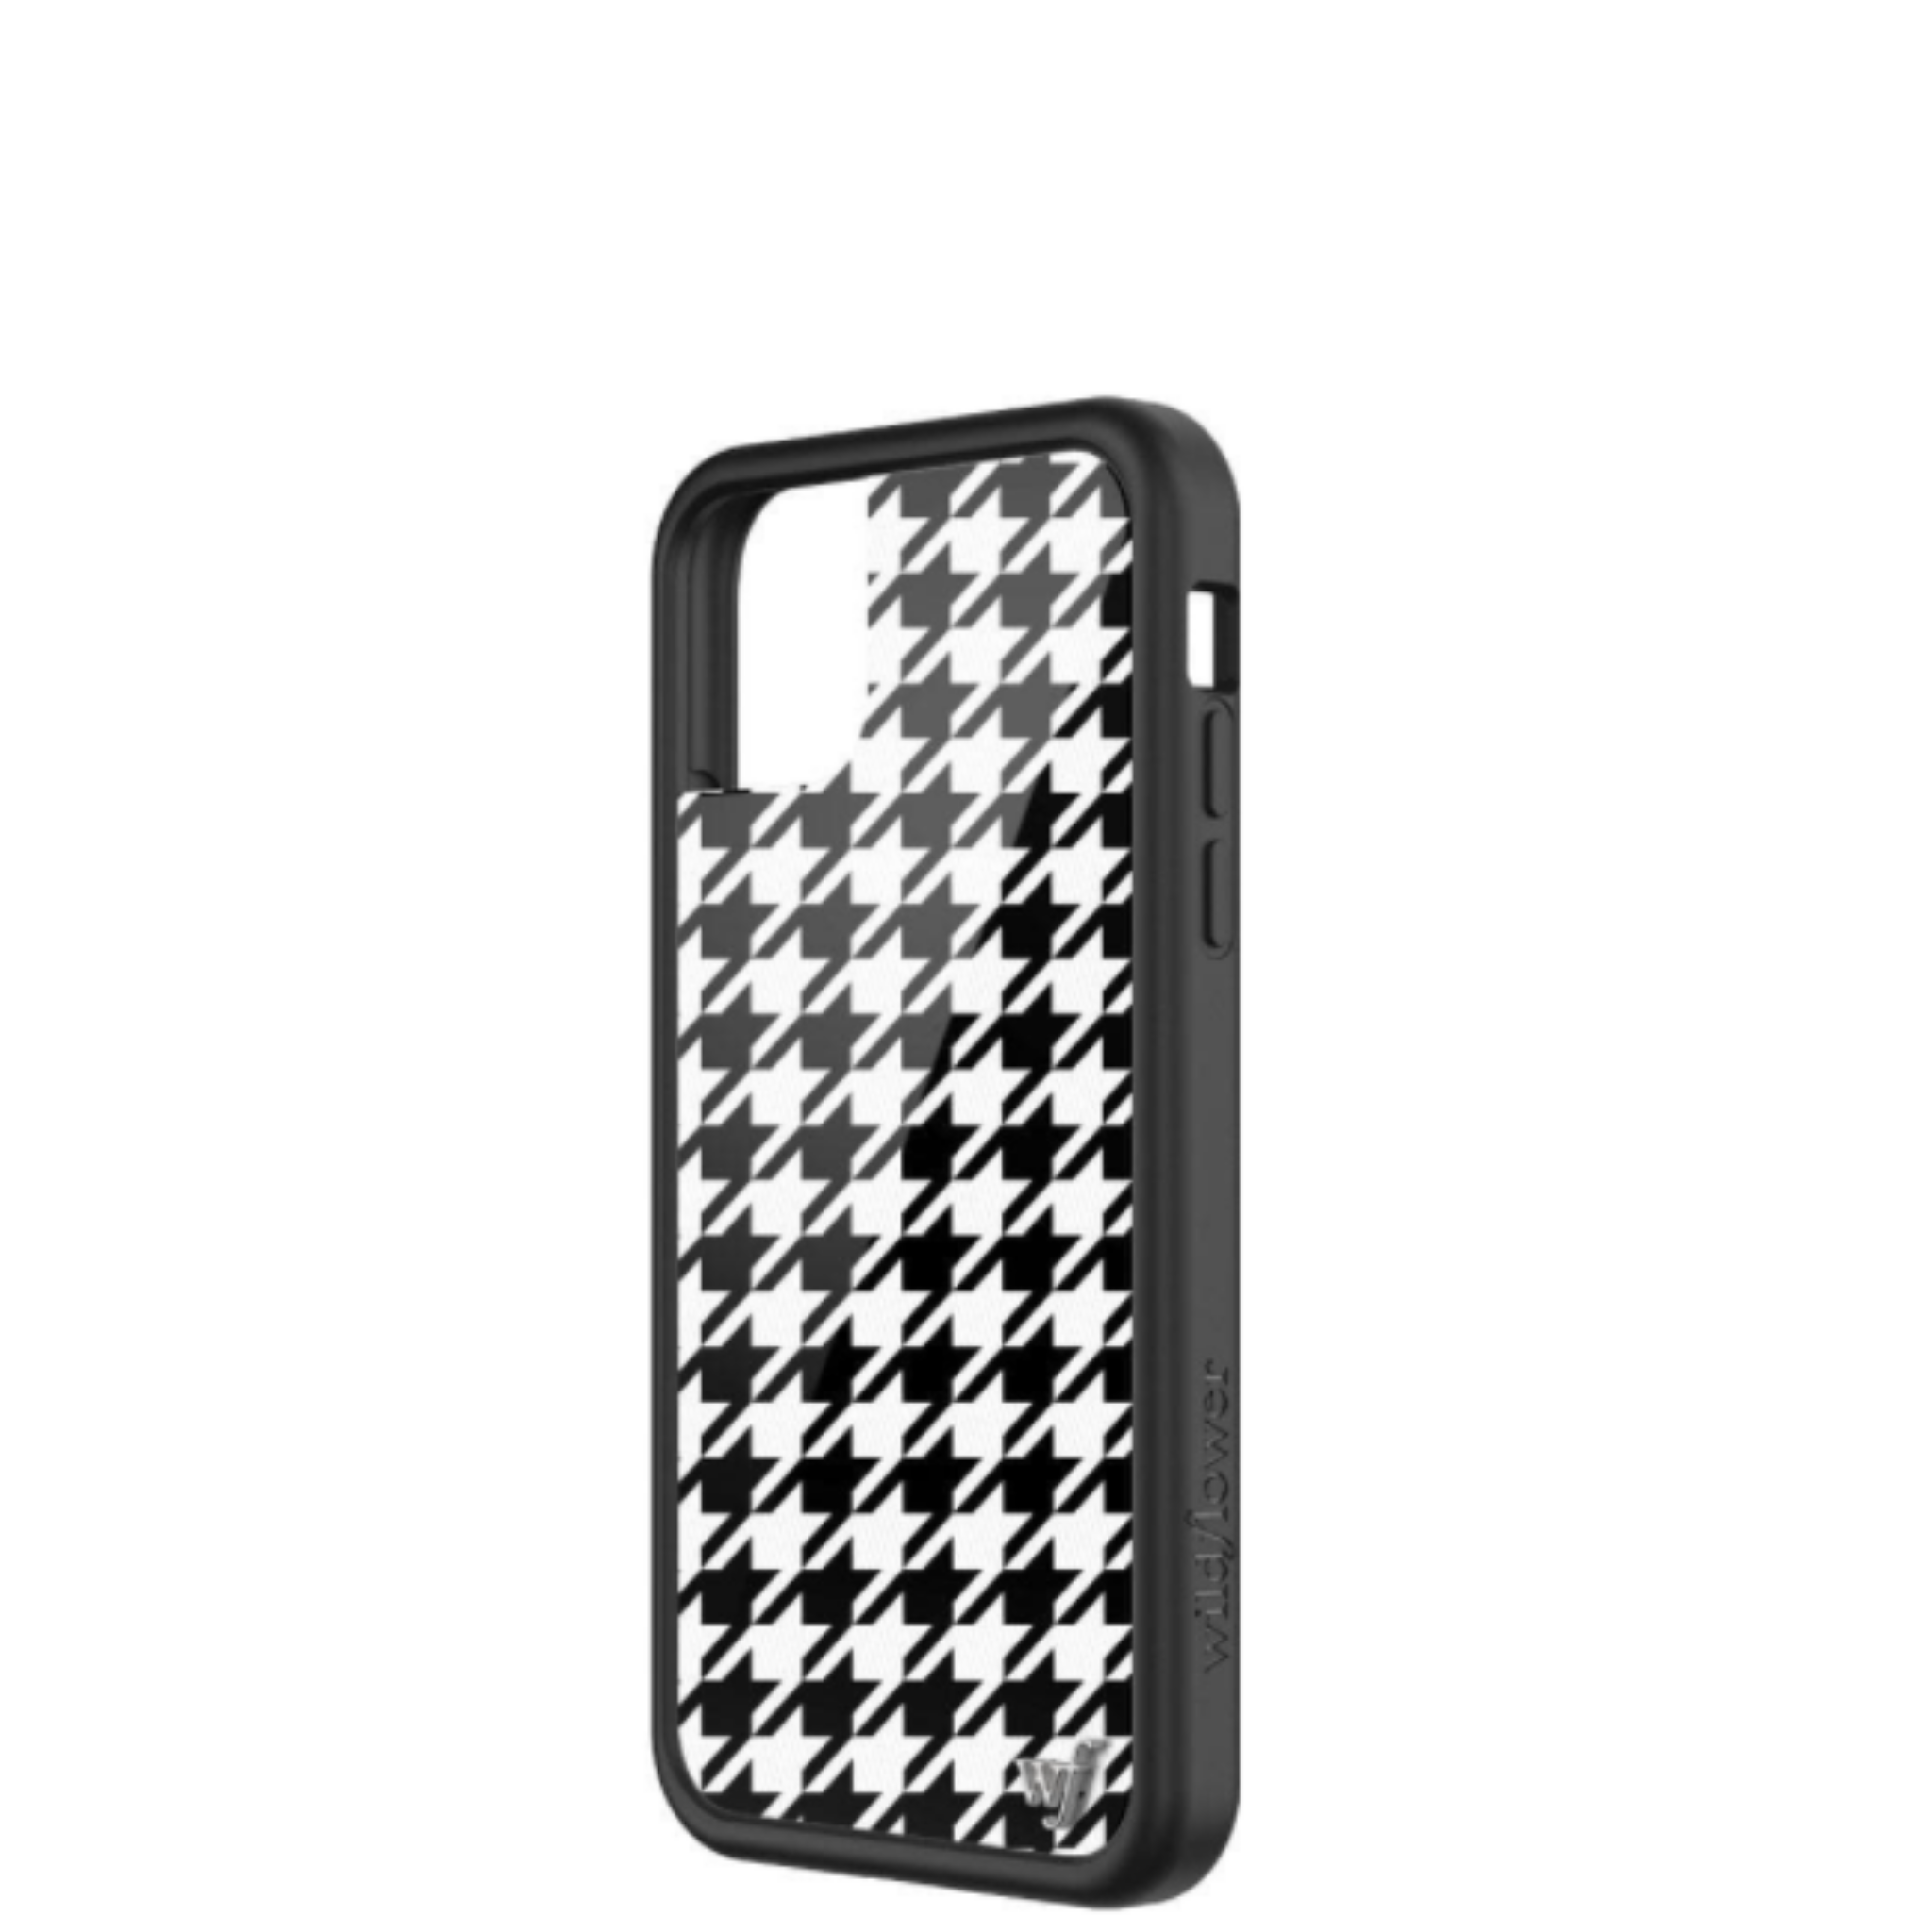 Houndstooth iPhone 12 Pro Max Case